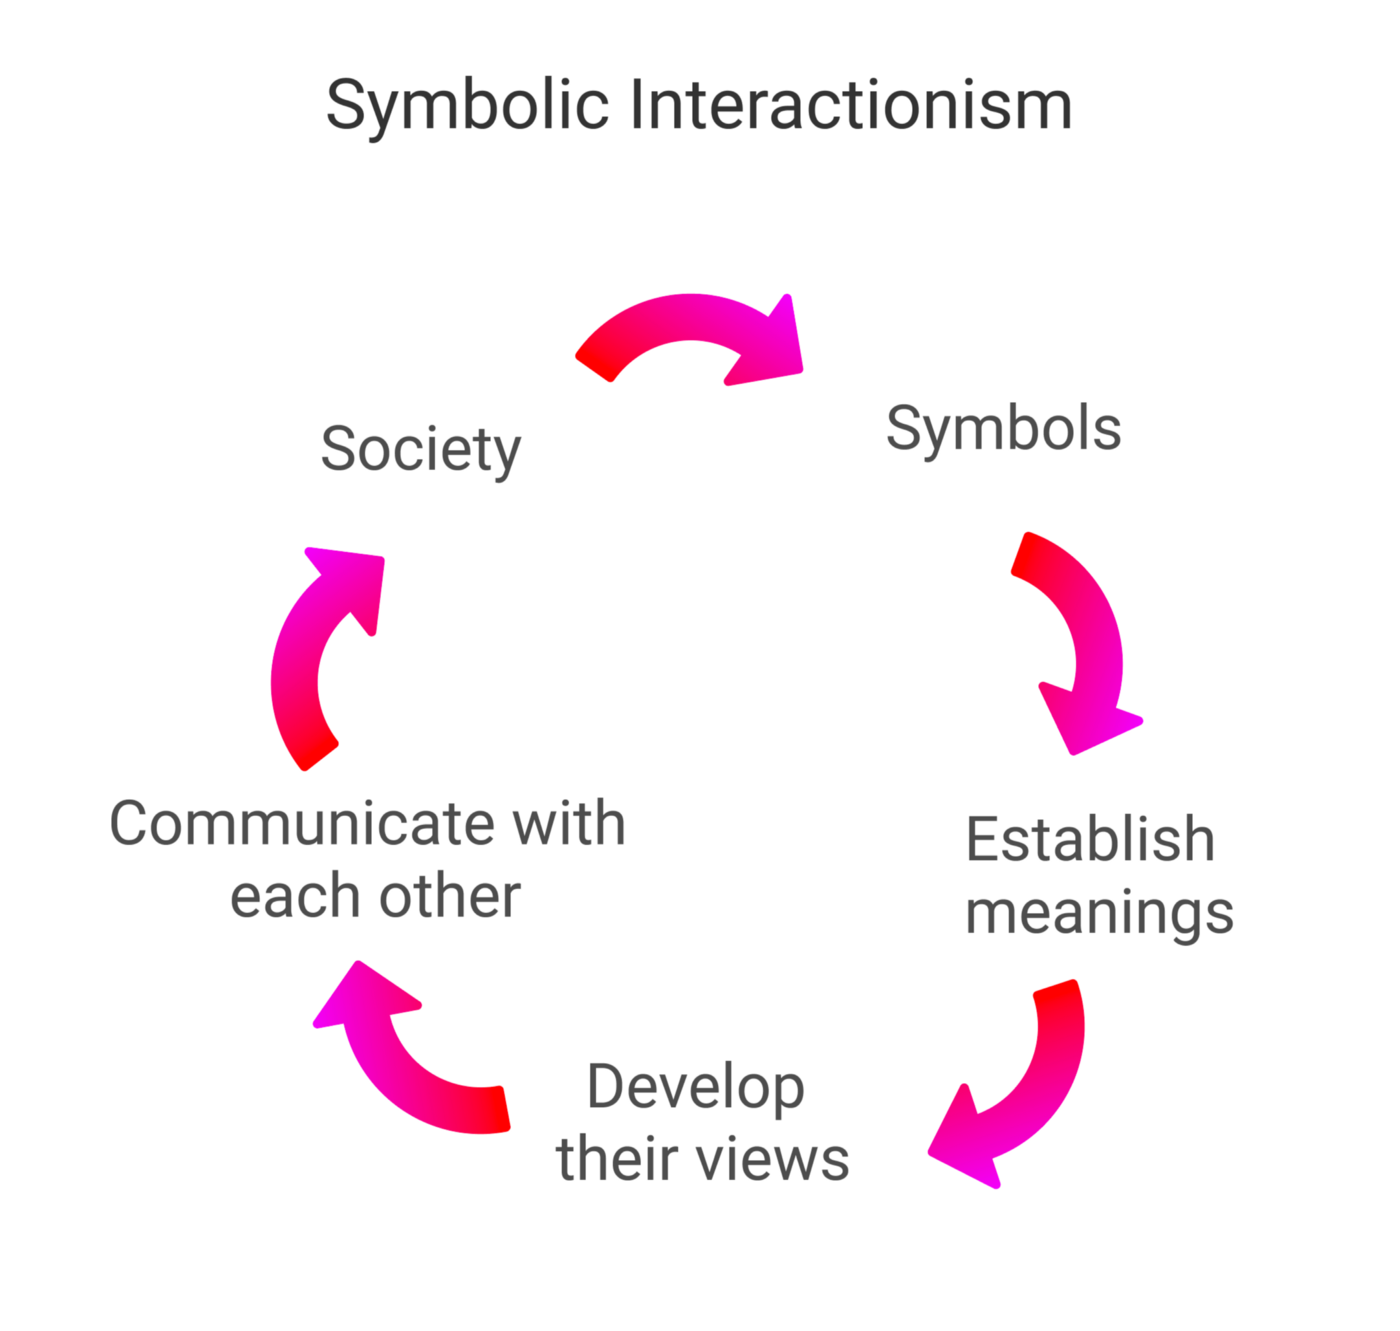 Symbolic interaction theory analyzes society by addressing the subjective meanings that people impose on objects, events, and behaviors. Subjective meanings are given primacy because it is believed that people behave based on what they believe and not just on what is objectively true.